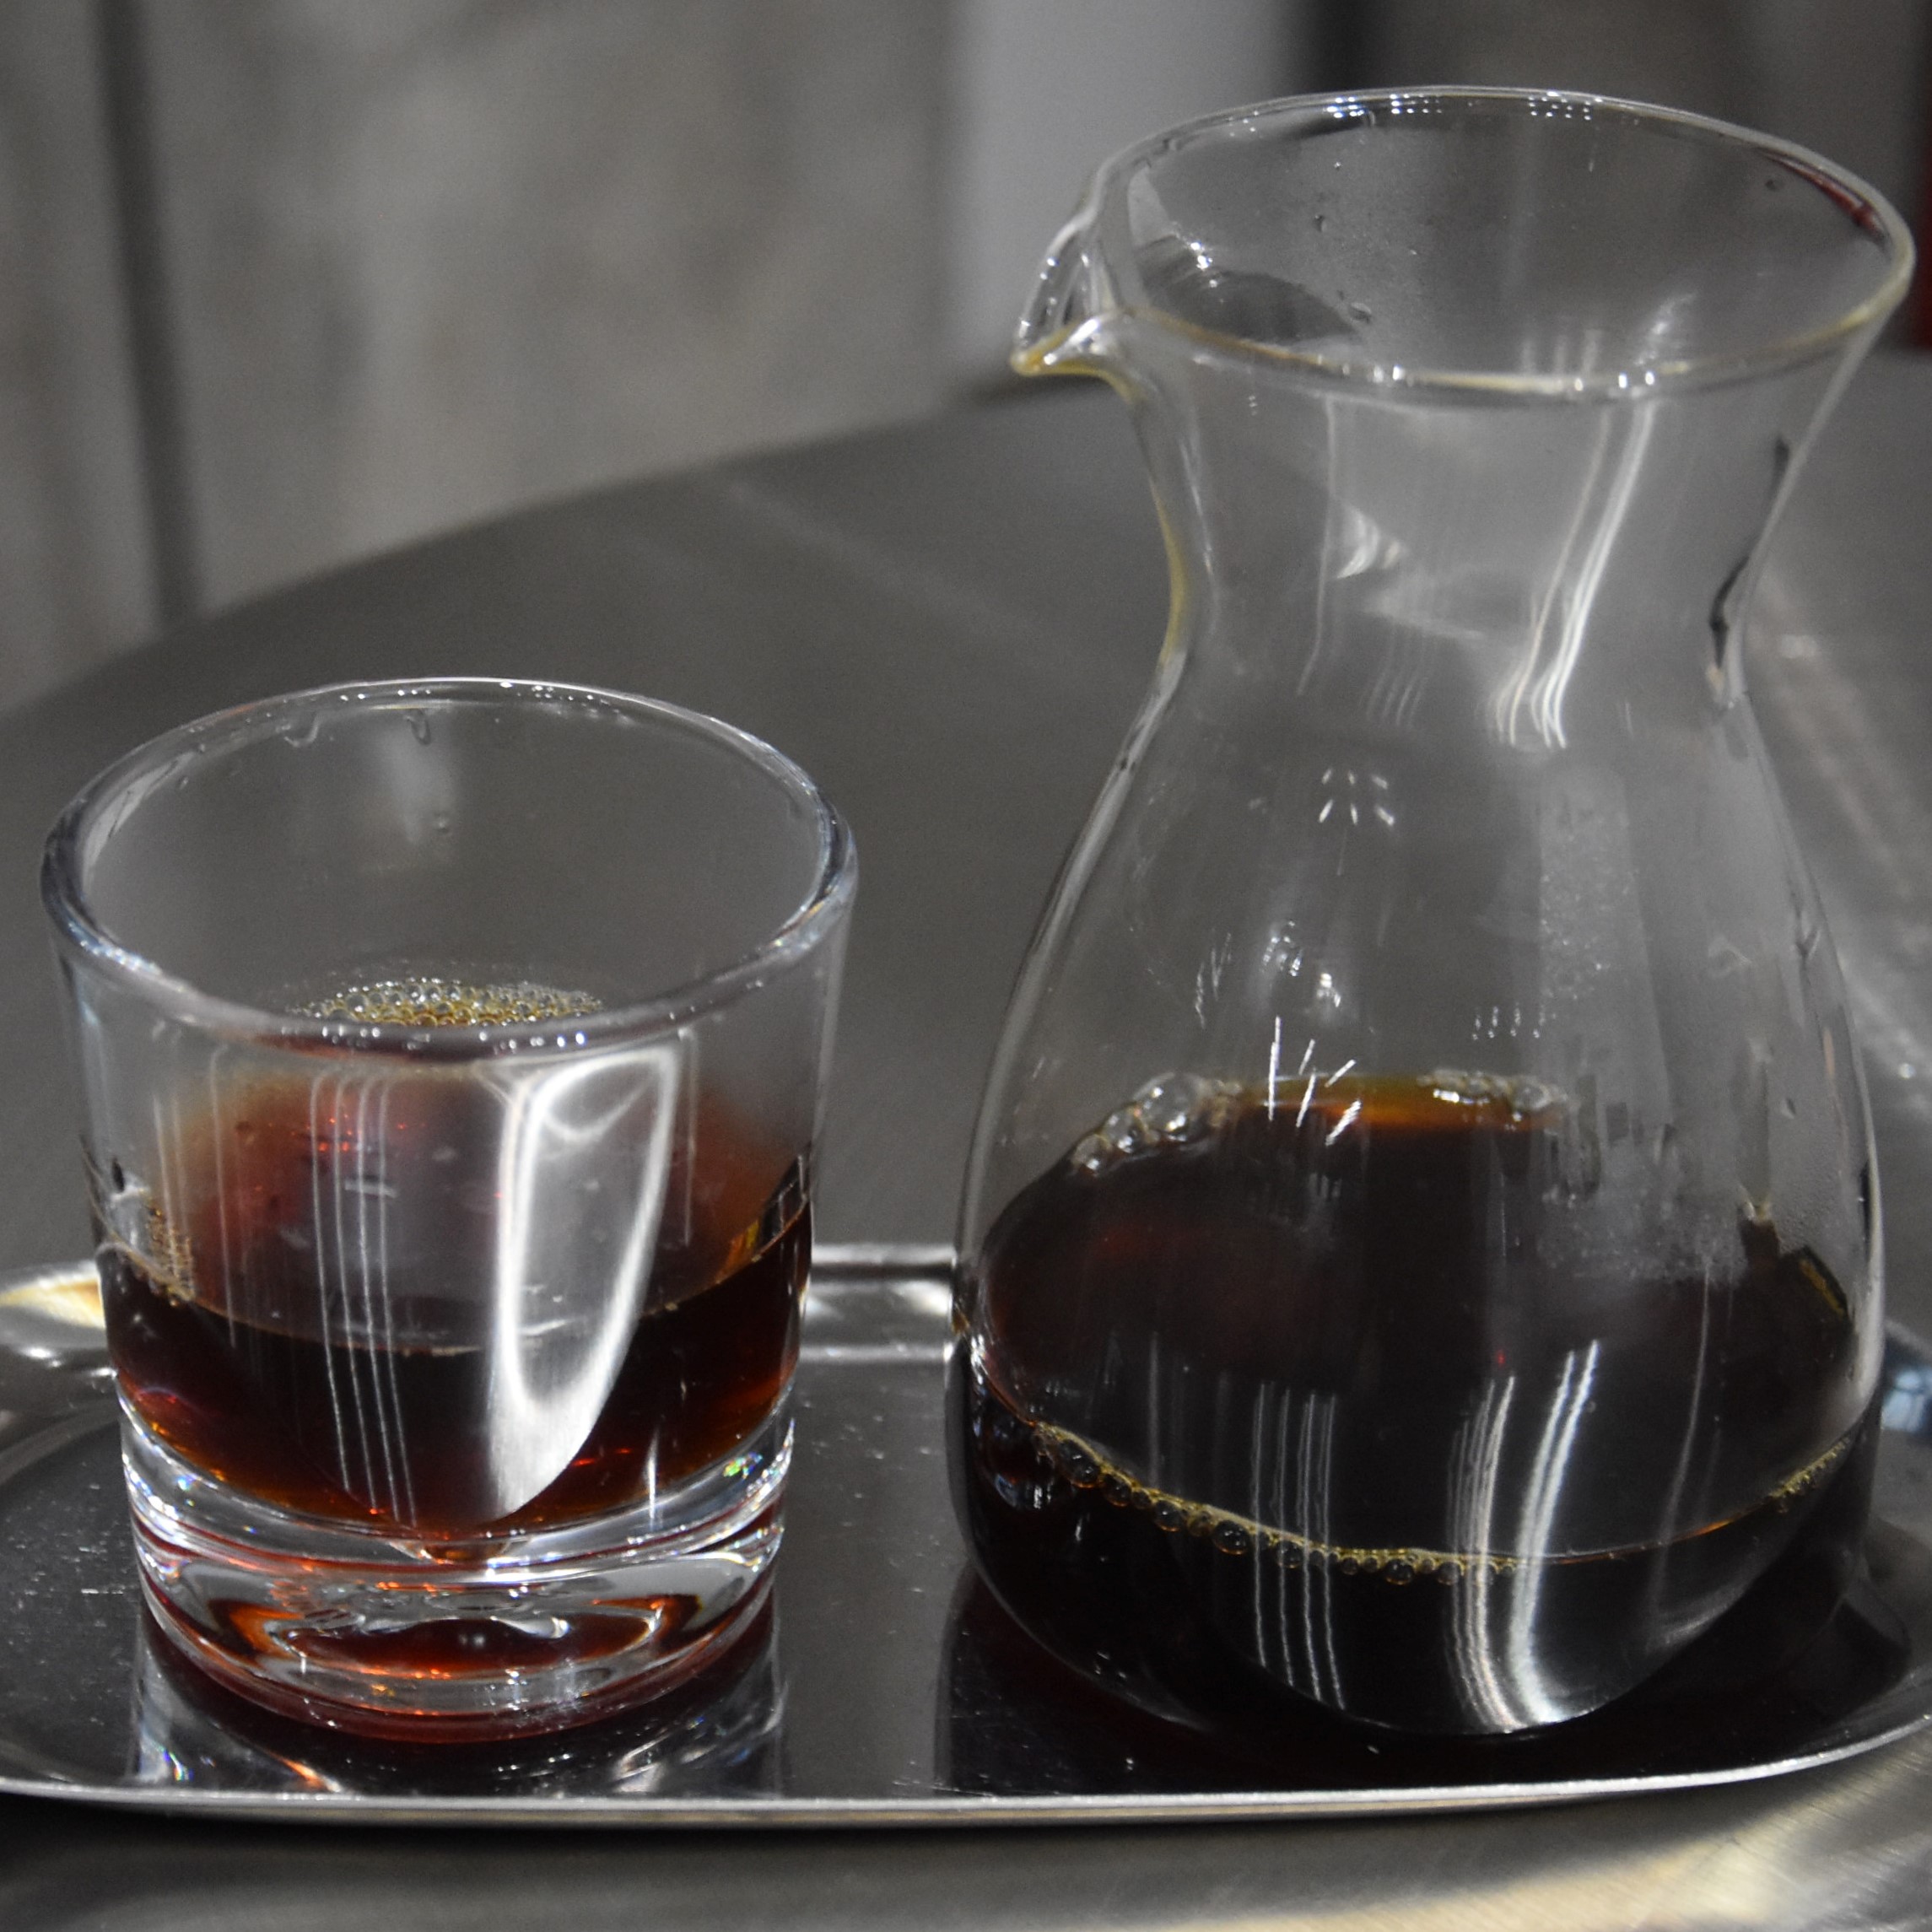 A naturally-processed Yunnan single-origin served in a carafe, with a glass on the side, at UNDEF/NE in Shanghai.